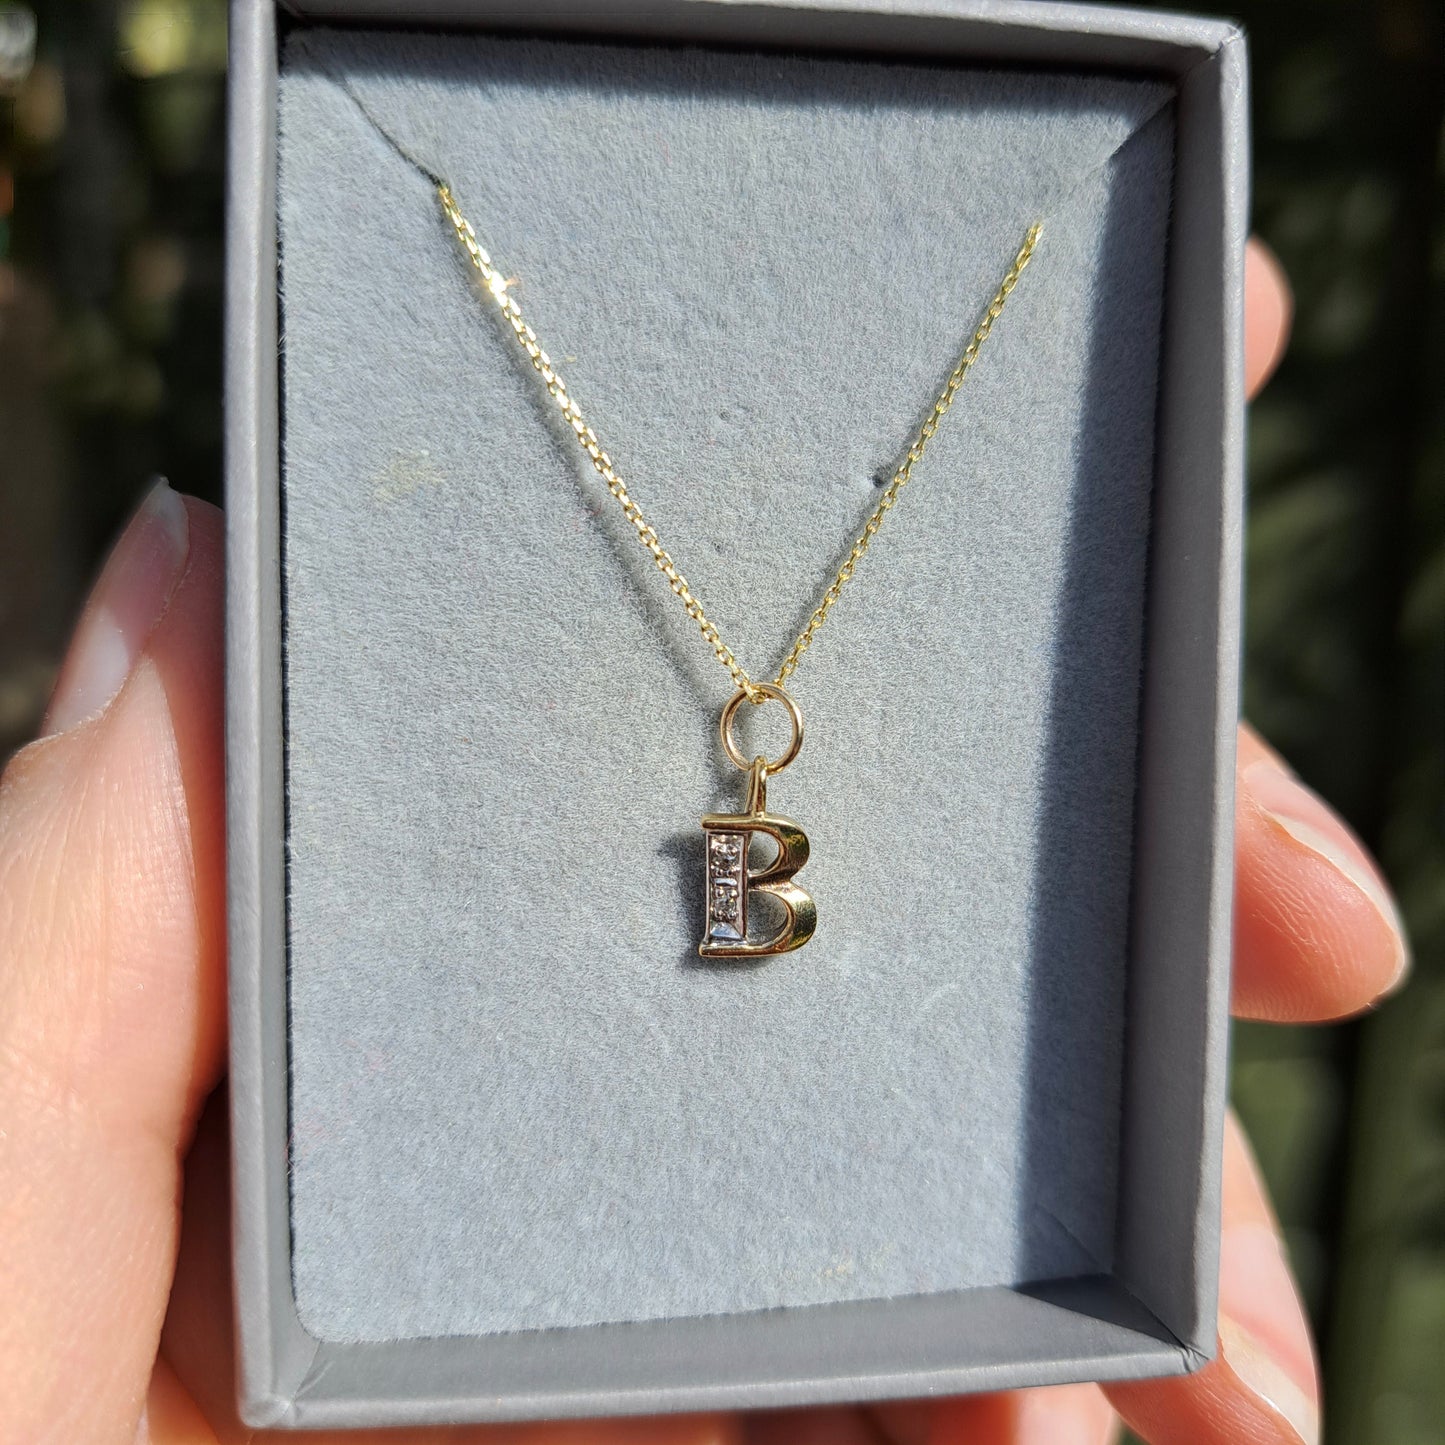 Vintage 9ct Gold and Diamonds Letter B Charm